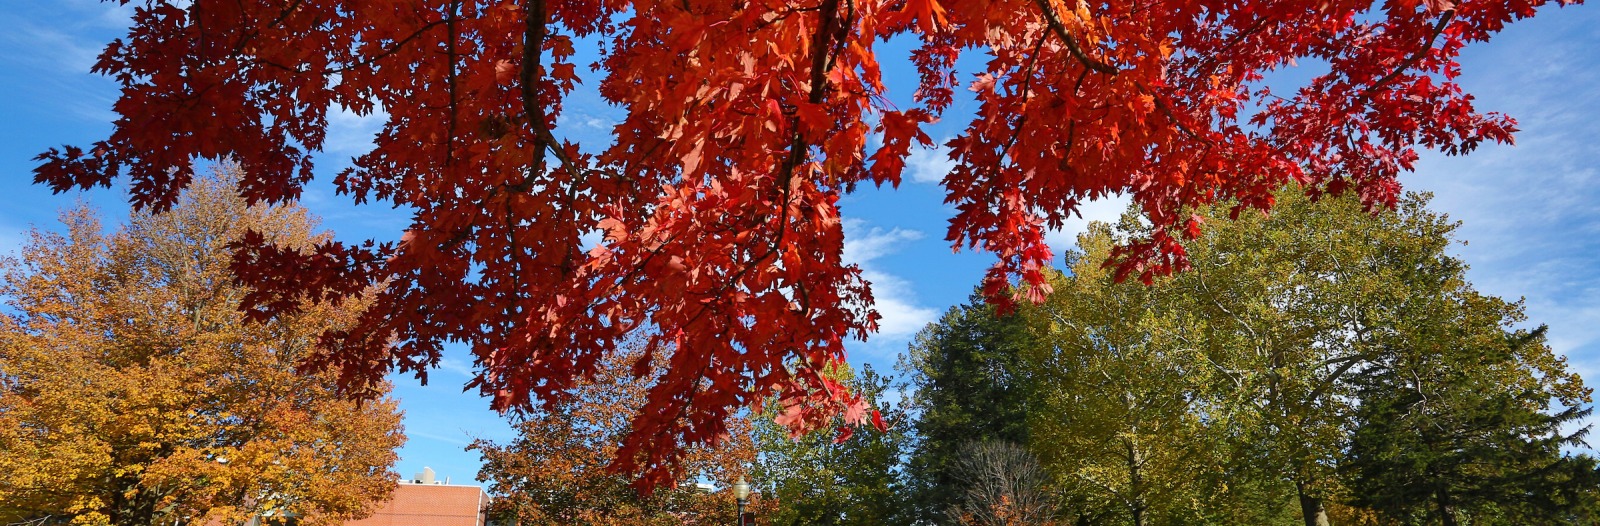 Trees with vibrantly colored leaves in the fall